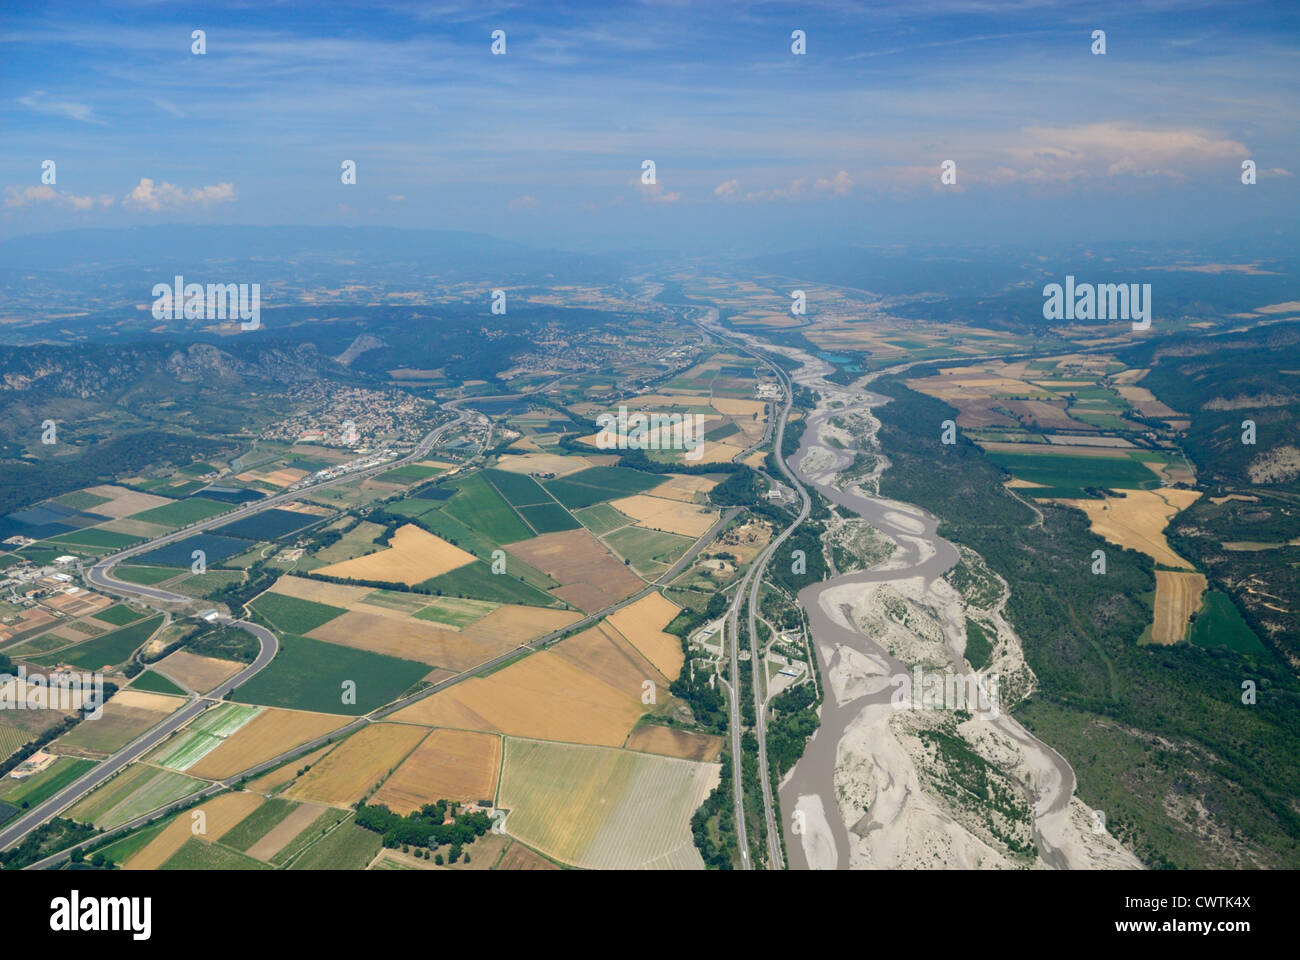 Aerial view of Durance valley and river, East of Manosque, Alpes de Haute Provence, France Stock Photo